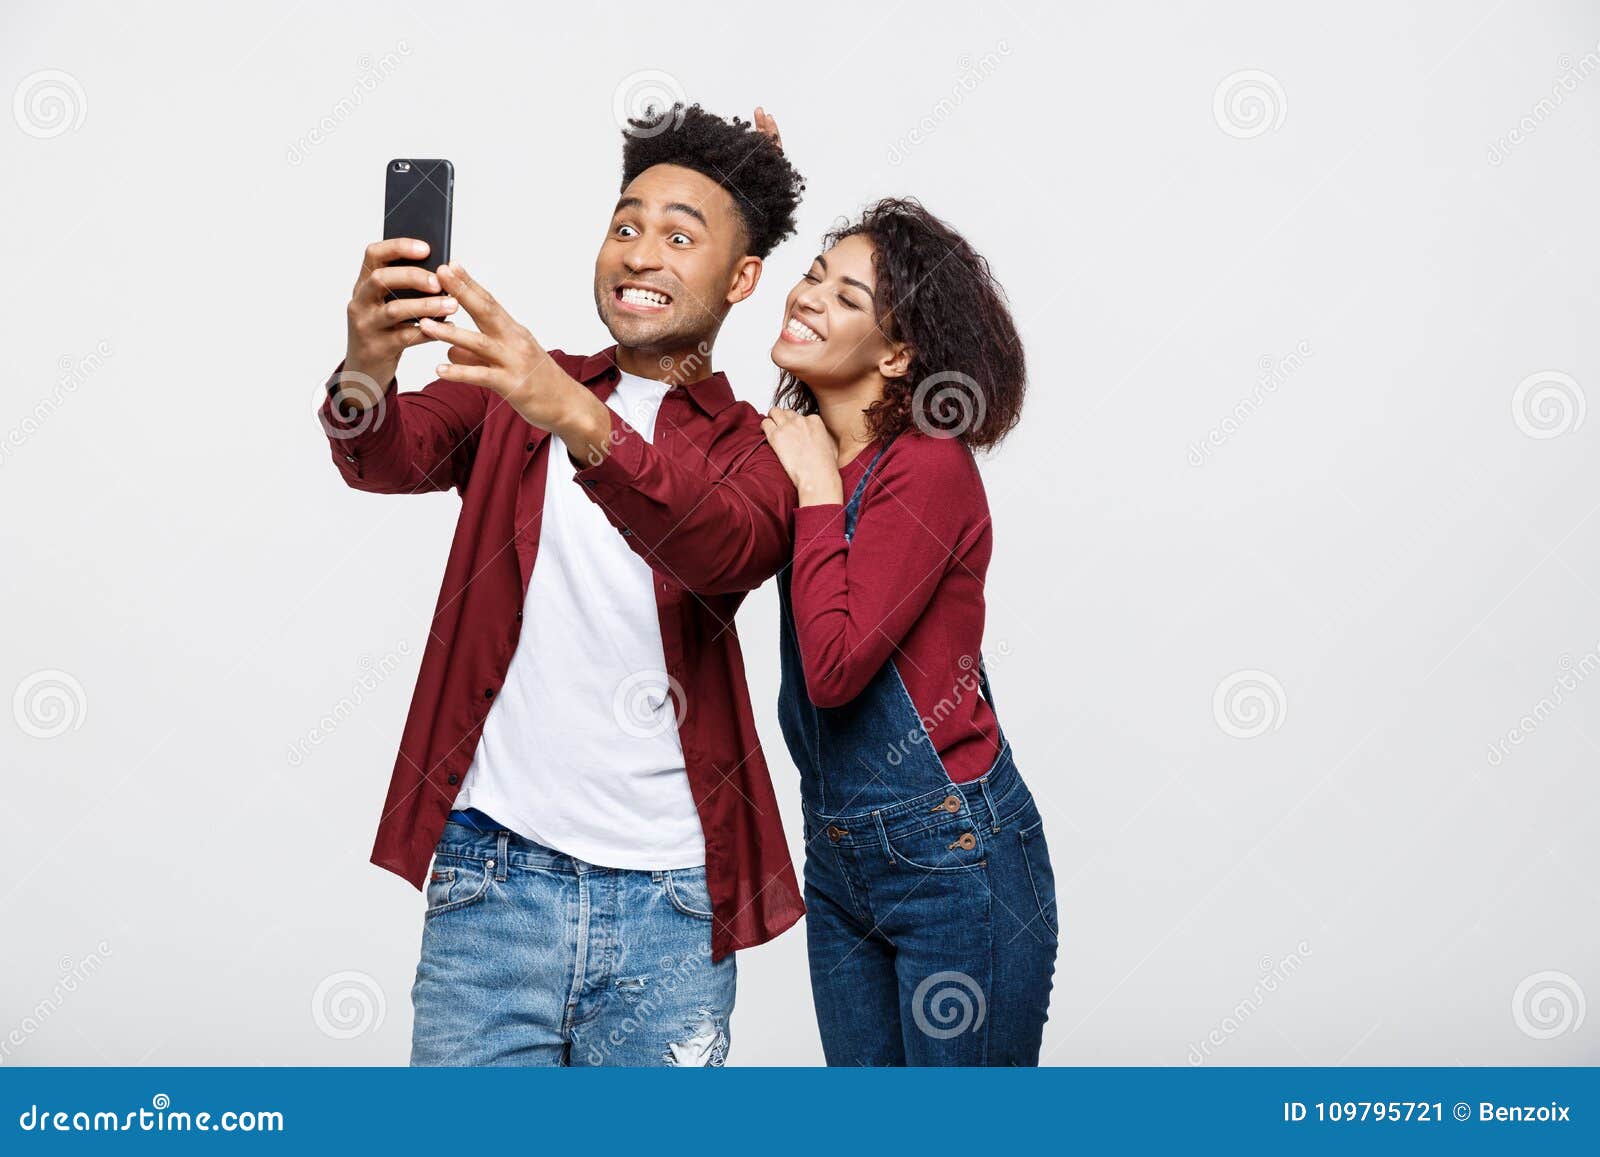 Aggregate More Than 124 Selfie Pose Images Vn